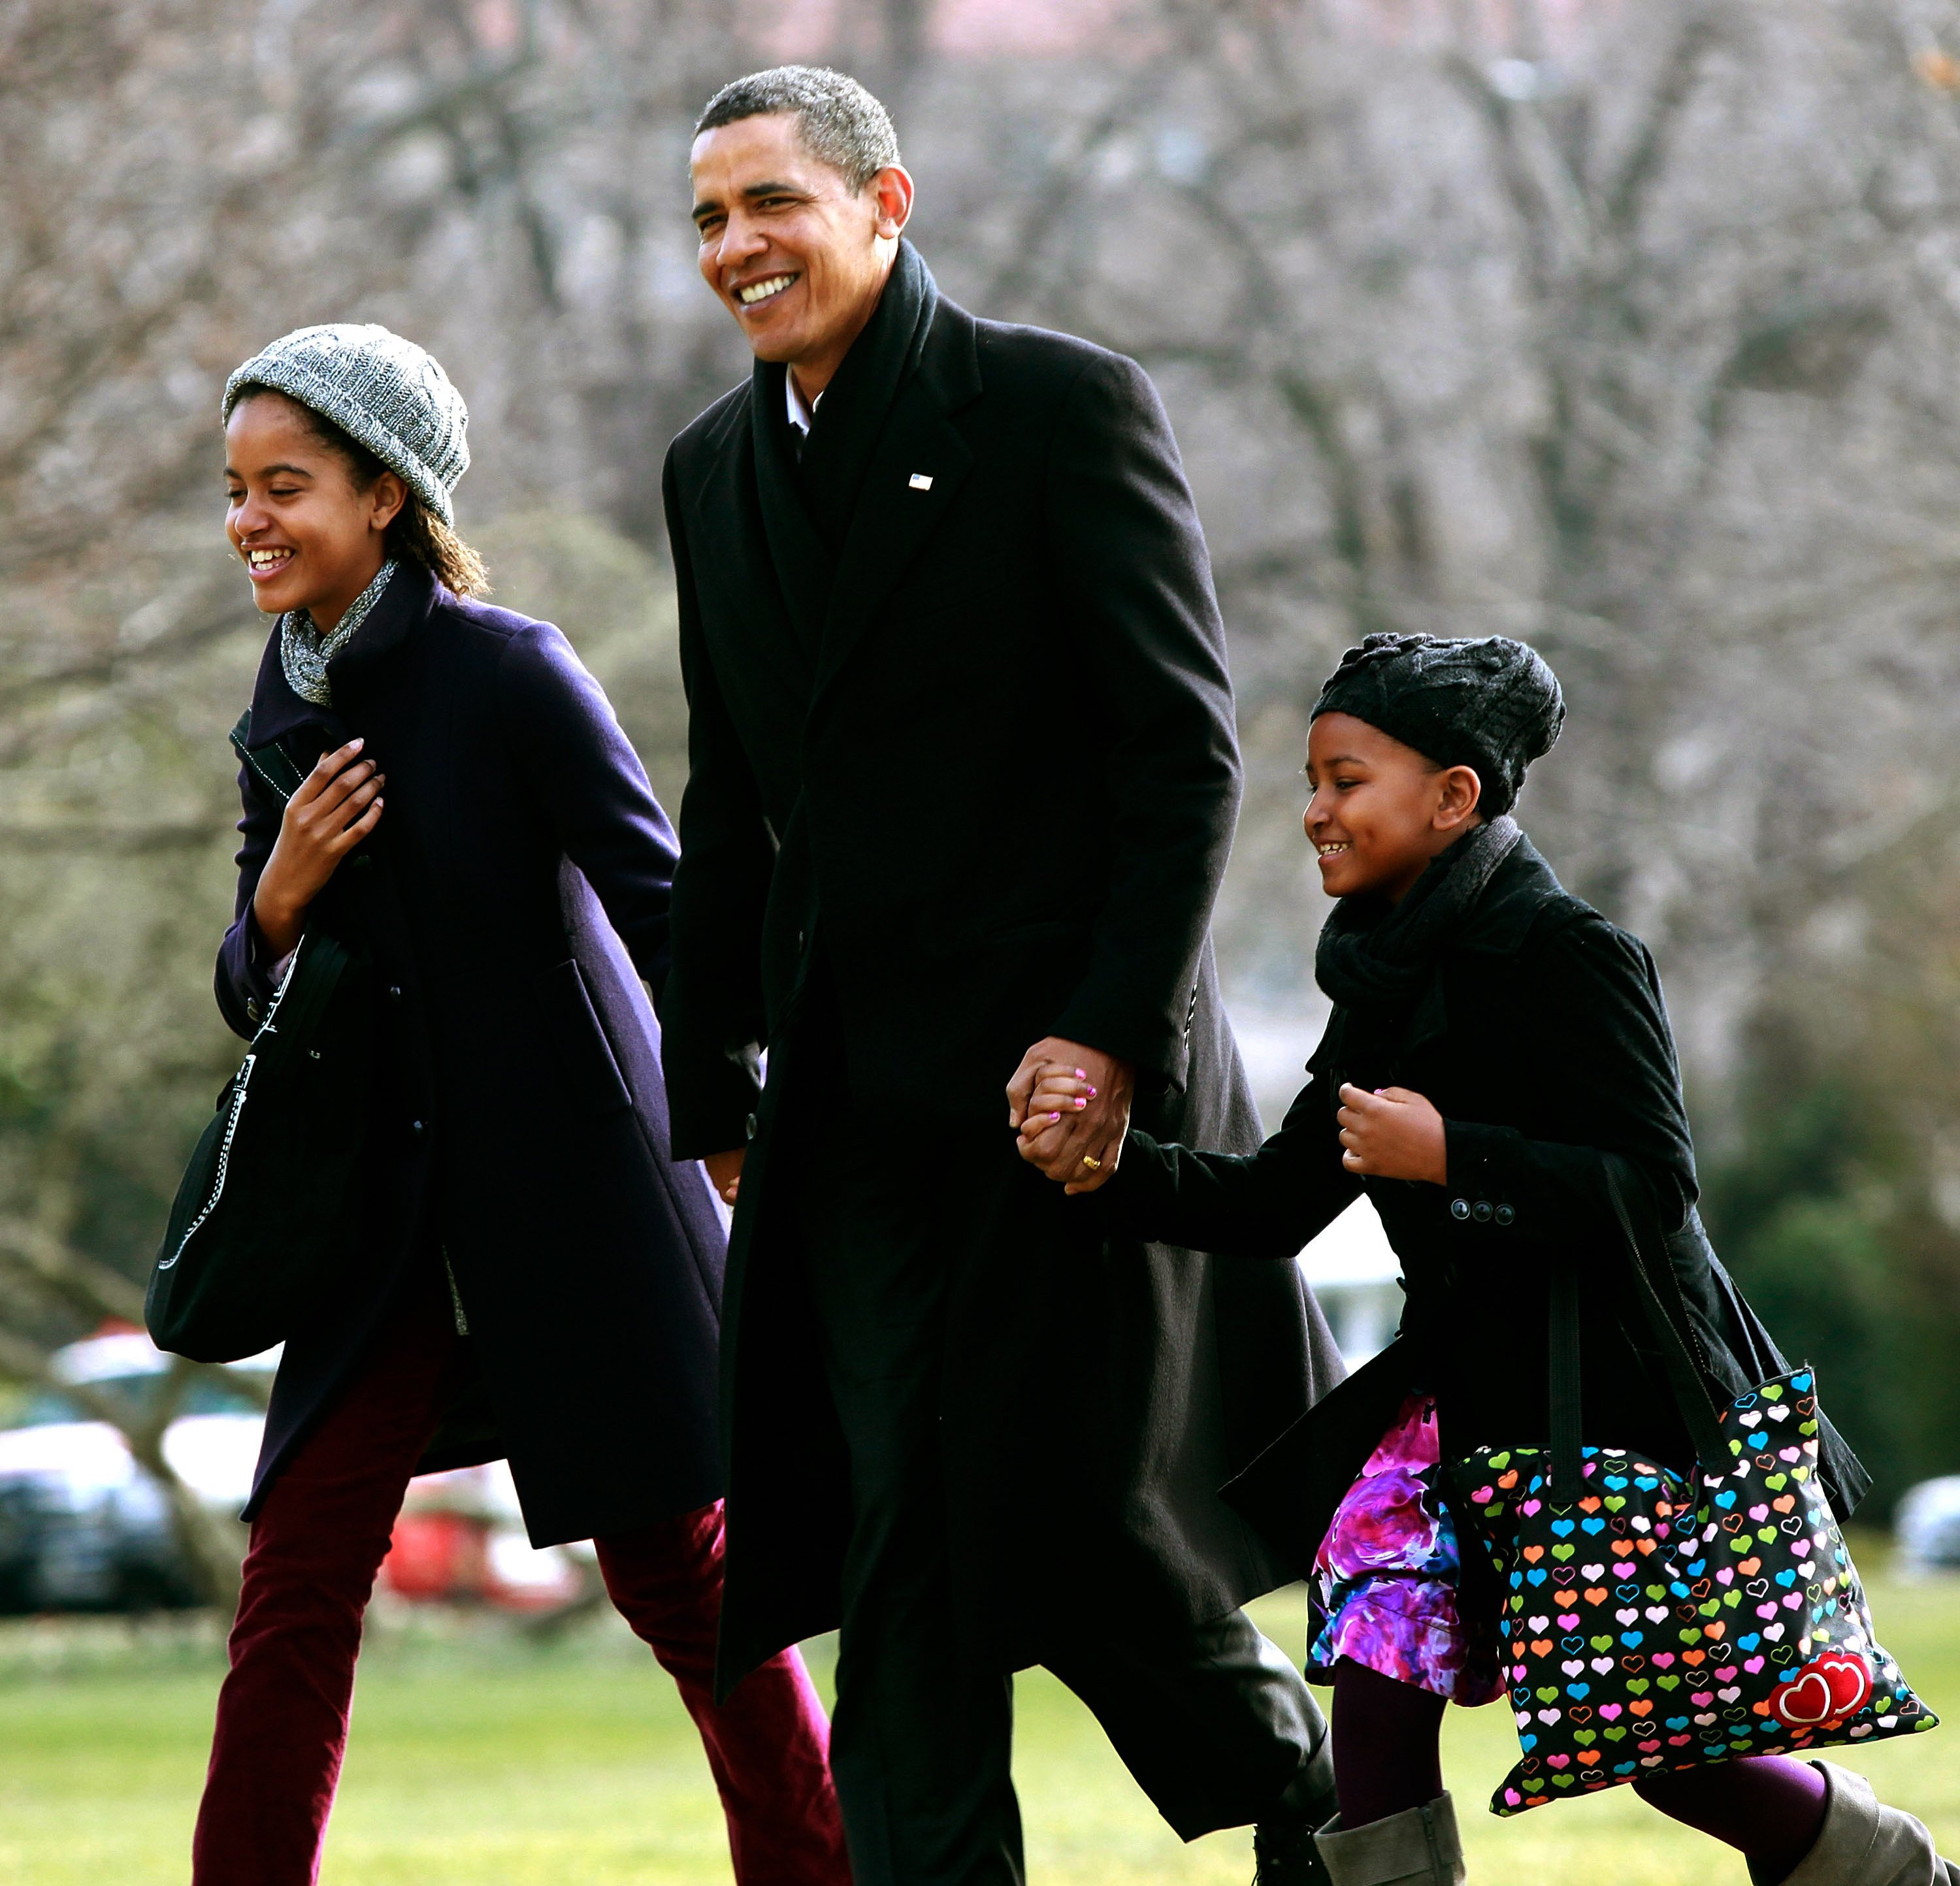 Then-President Barack Obama with his daughters Malia and Sasha on the Souh Lawn of the White House on January 4 2010 in Washington D, C.  |  Source: Getty Images